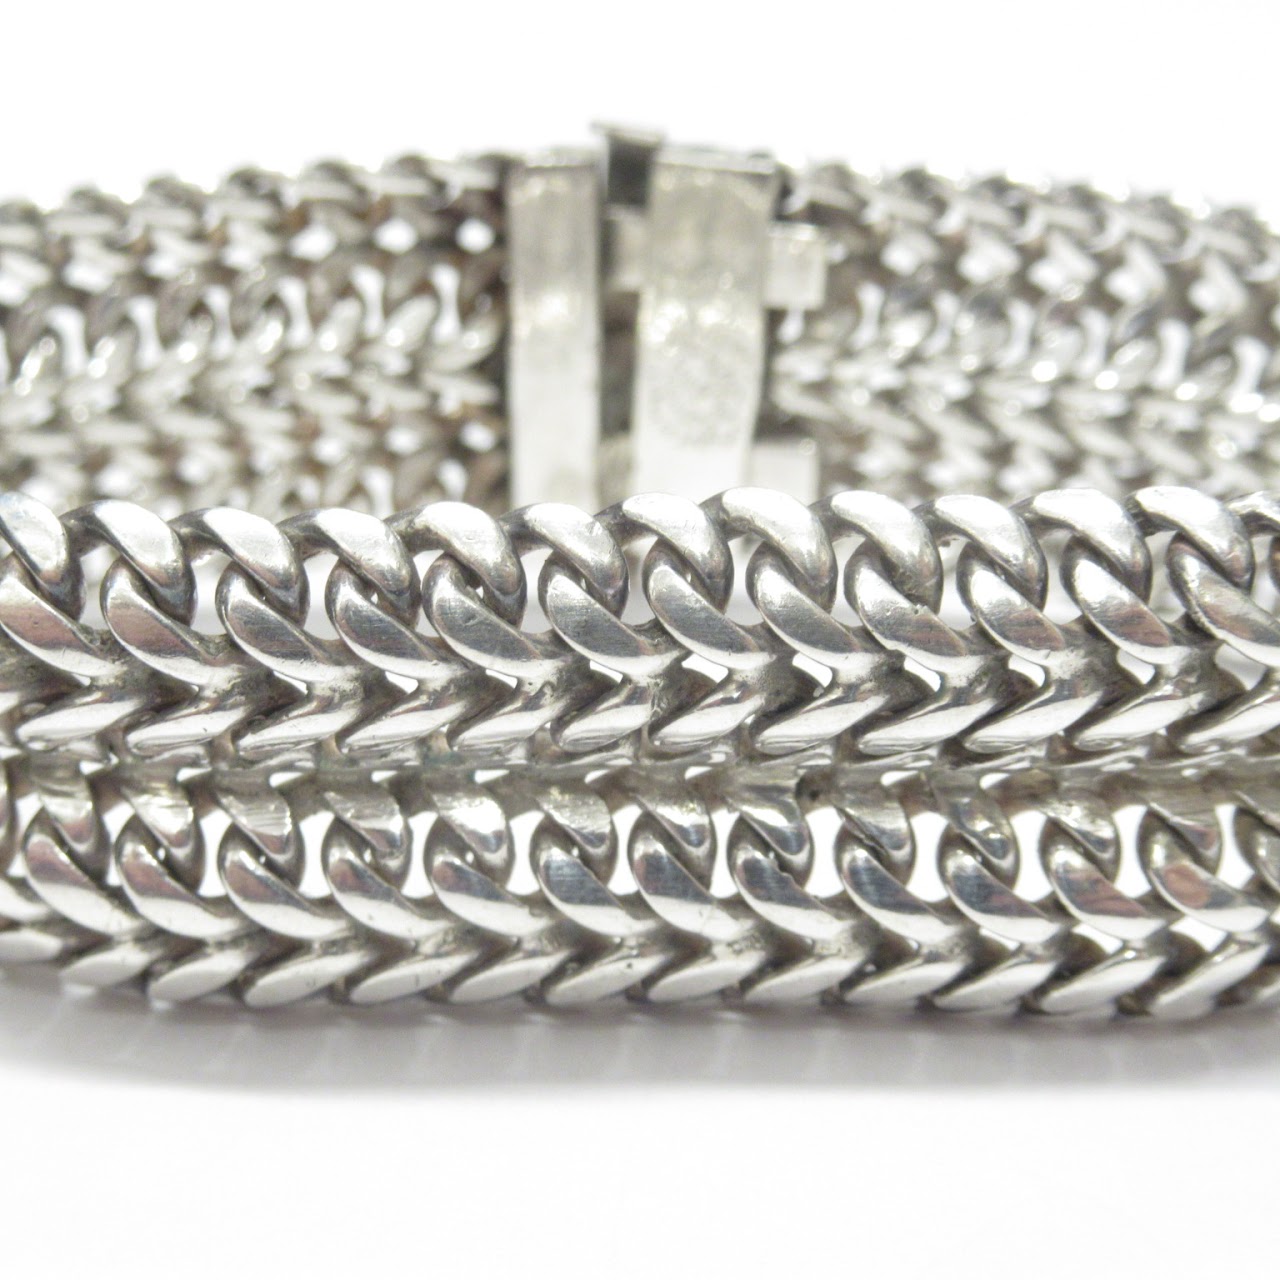 Sterling Silver Mexican Linked Chain Bracelet